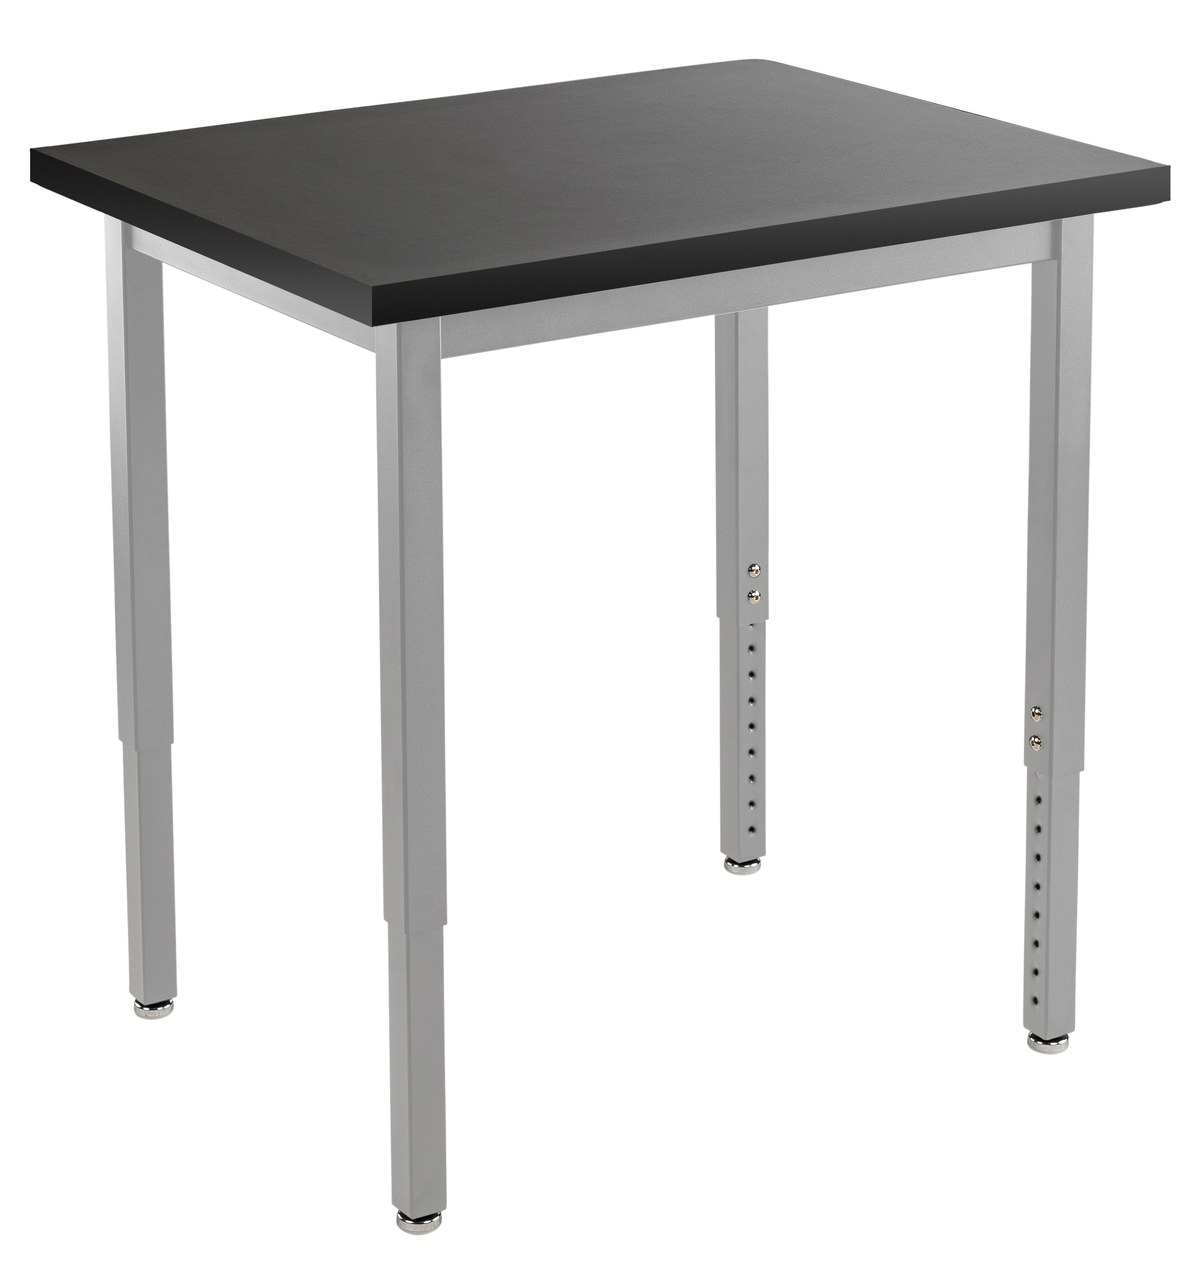 NPS Steel Science Lab Table -  24" x 24" -  Phenolic Top - Black Surface Color